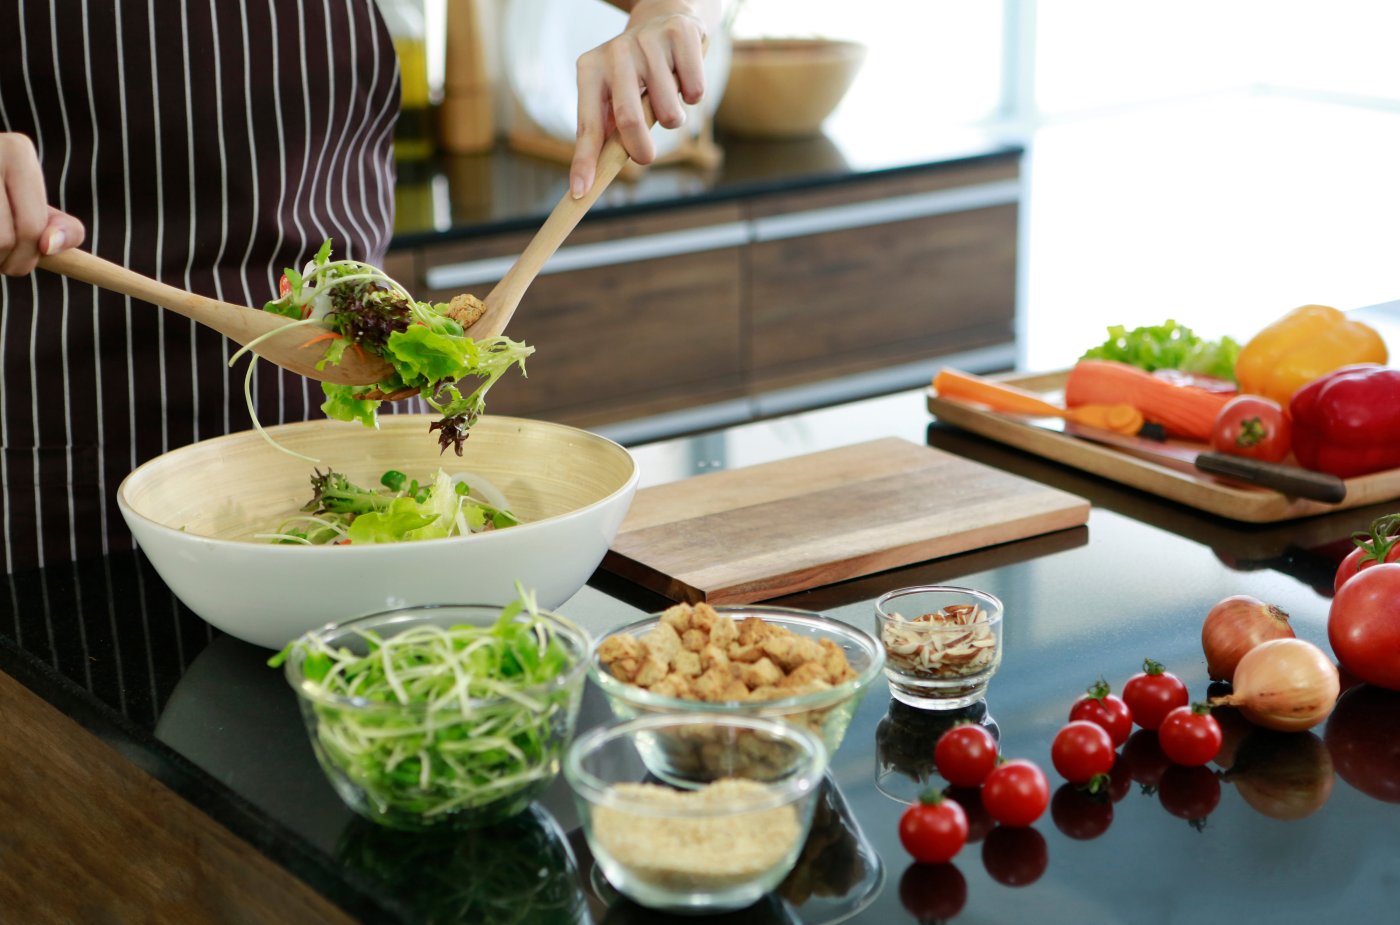 Chef preparing a salad dish with cutting board and ingredients on a black graniwe worktop